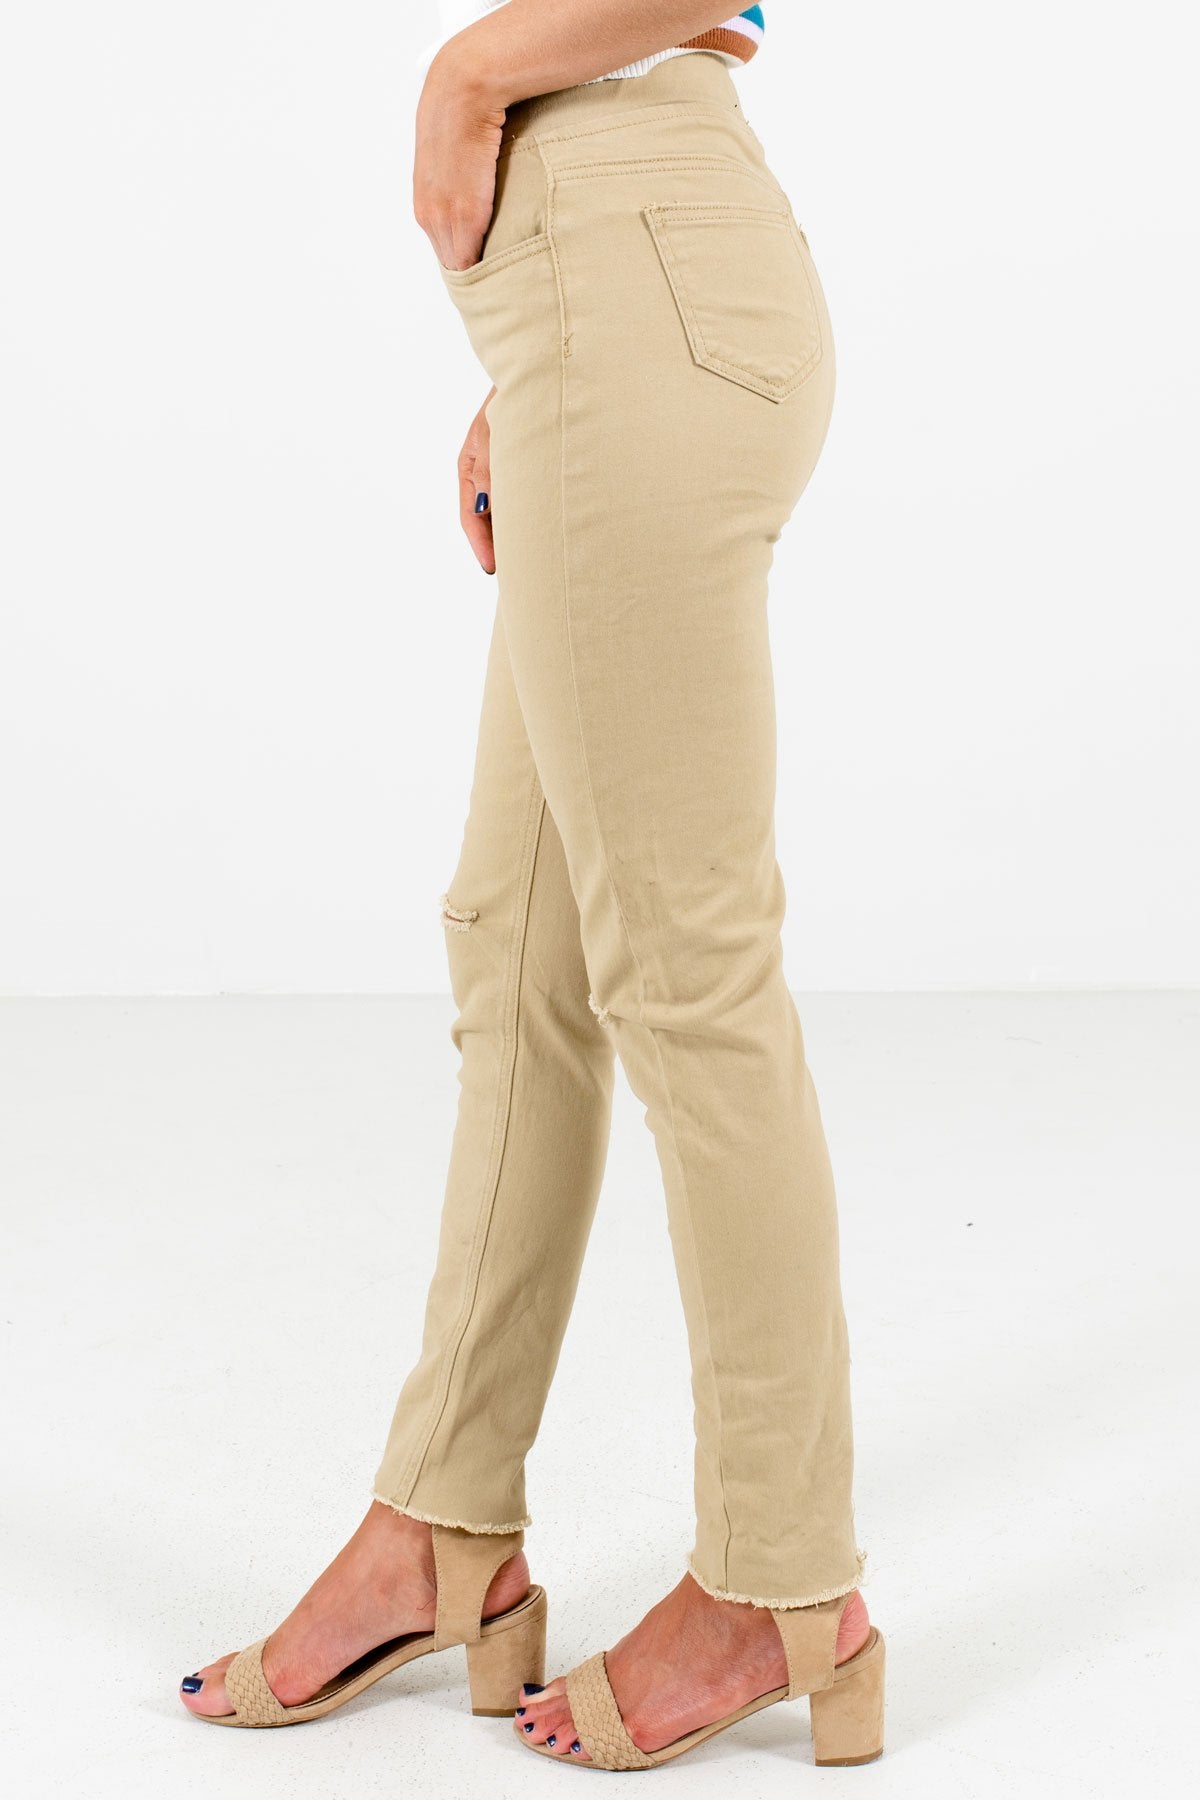 Buy Khaki Jeans & Jeggings for Women by GO COLORS Online